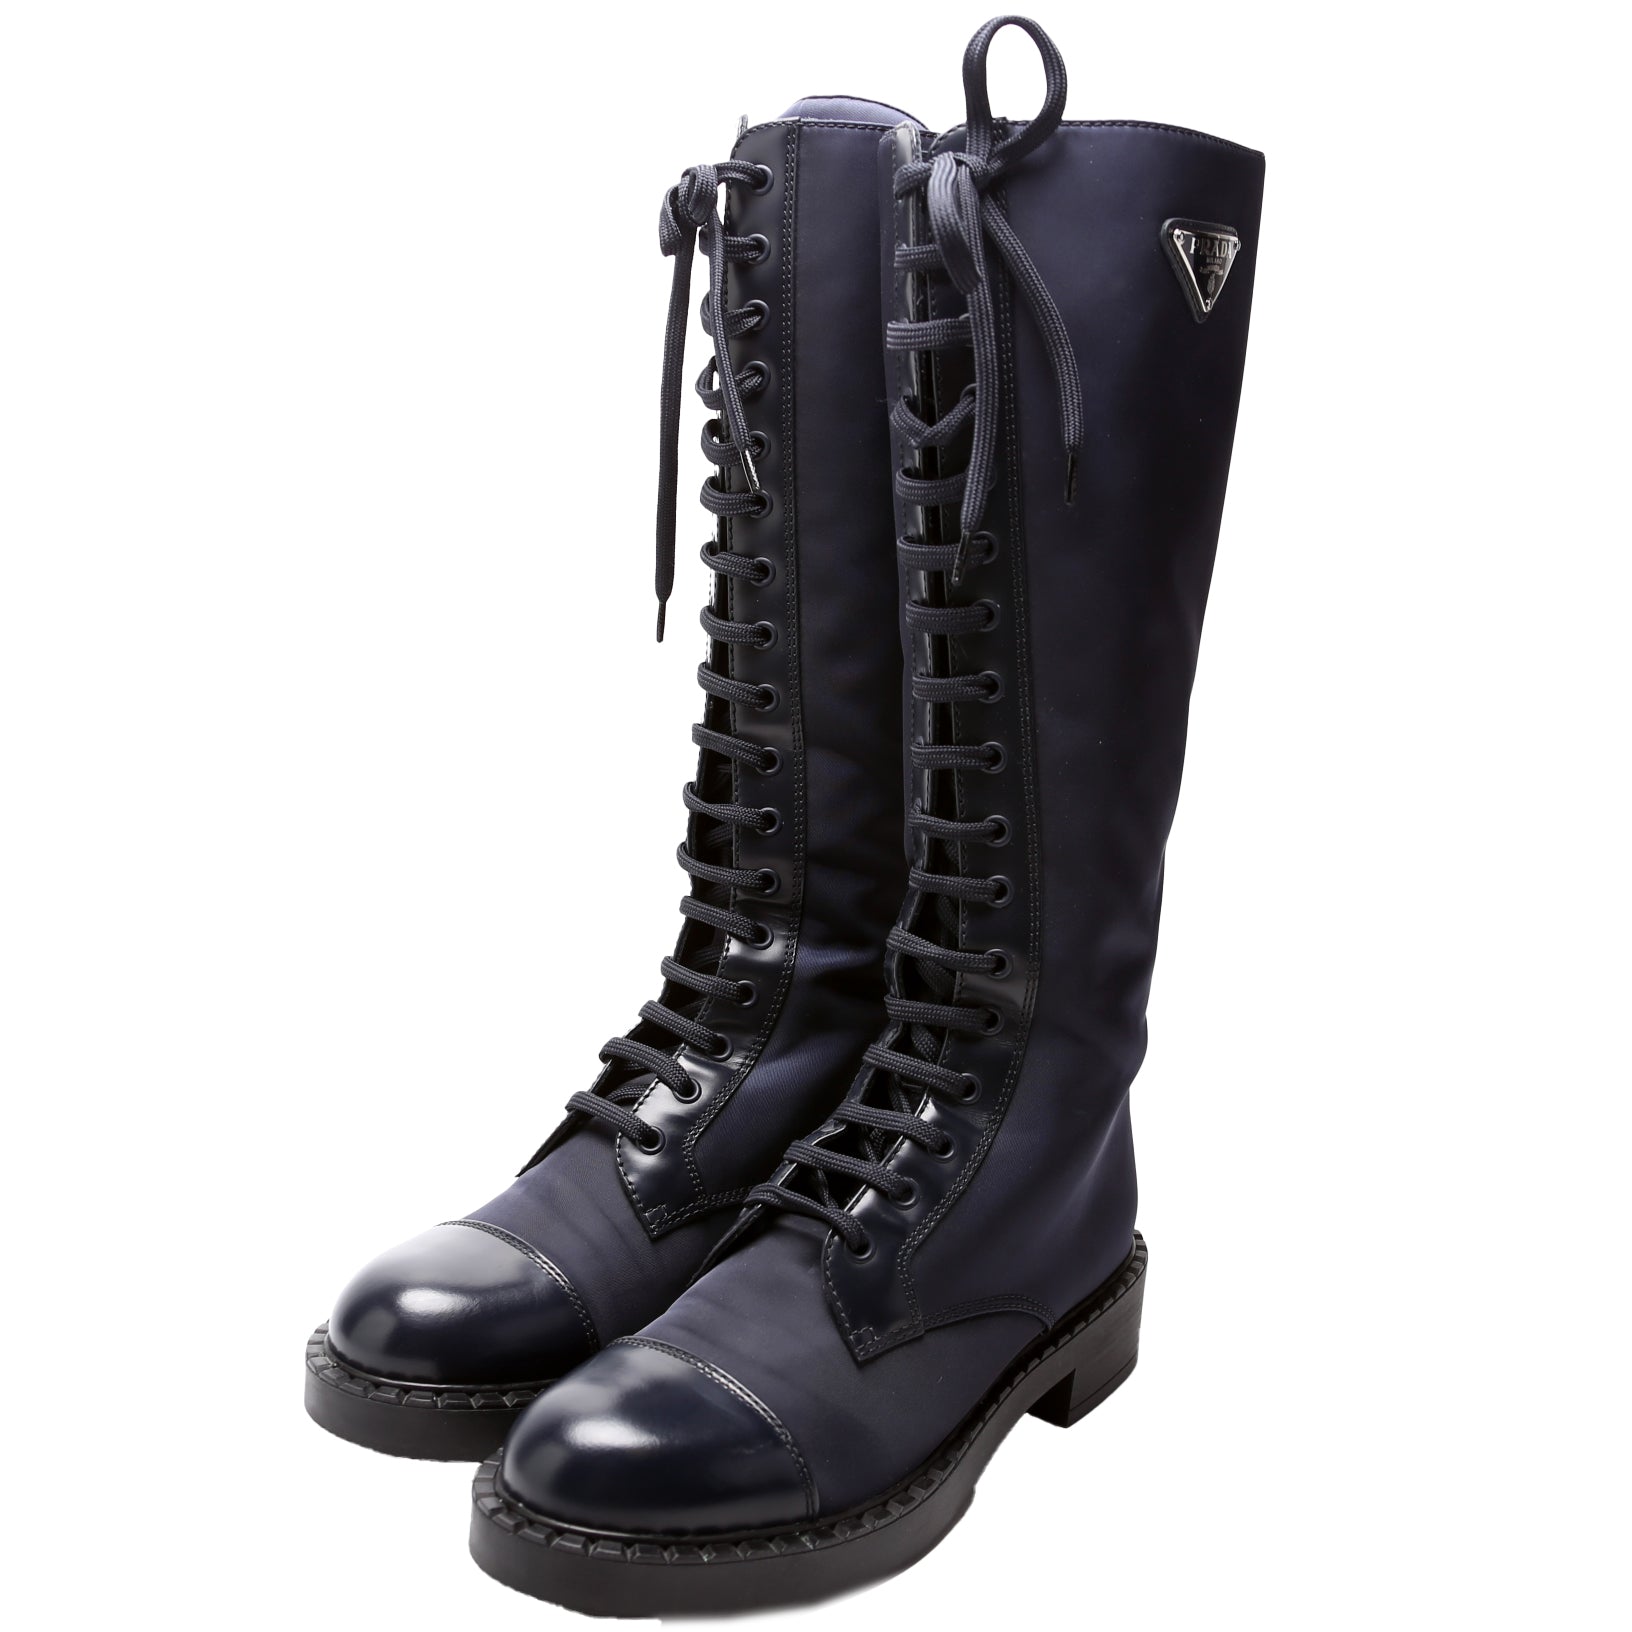 Re-Nylon Lace Up Knee High Combat Boots Size 39